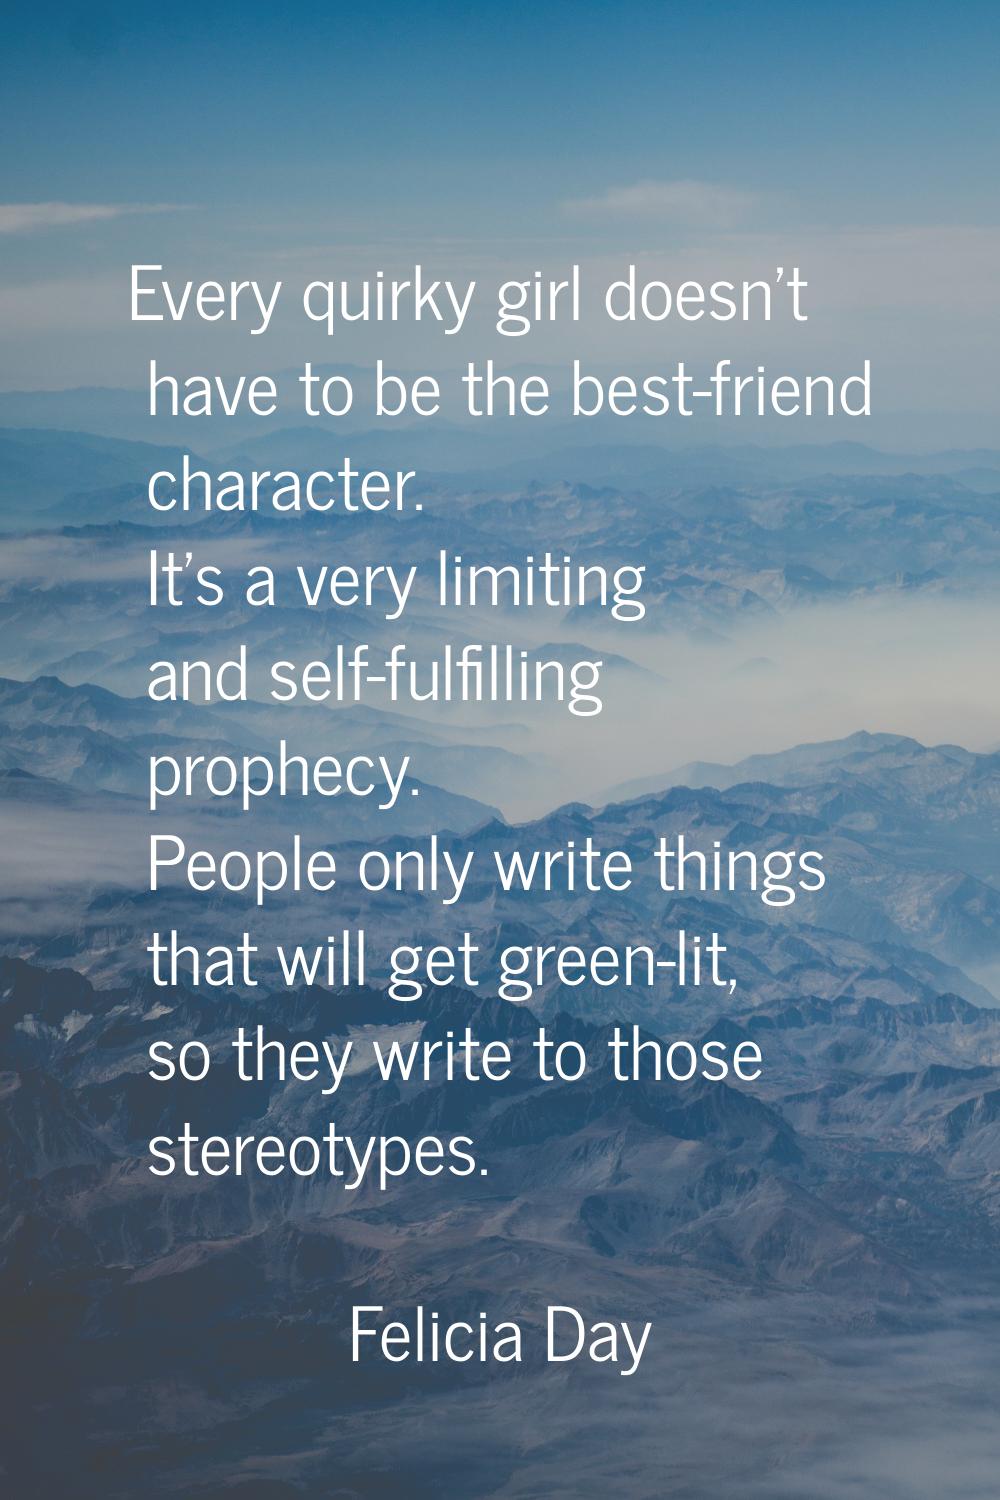 Every quirky girl doesn't have to be the best-friend character. It's a very limiting and self-fulfi